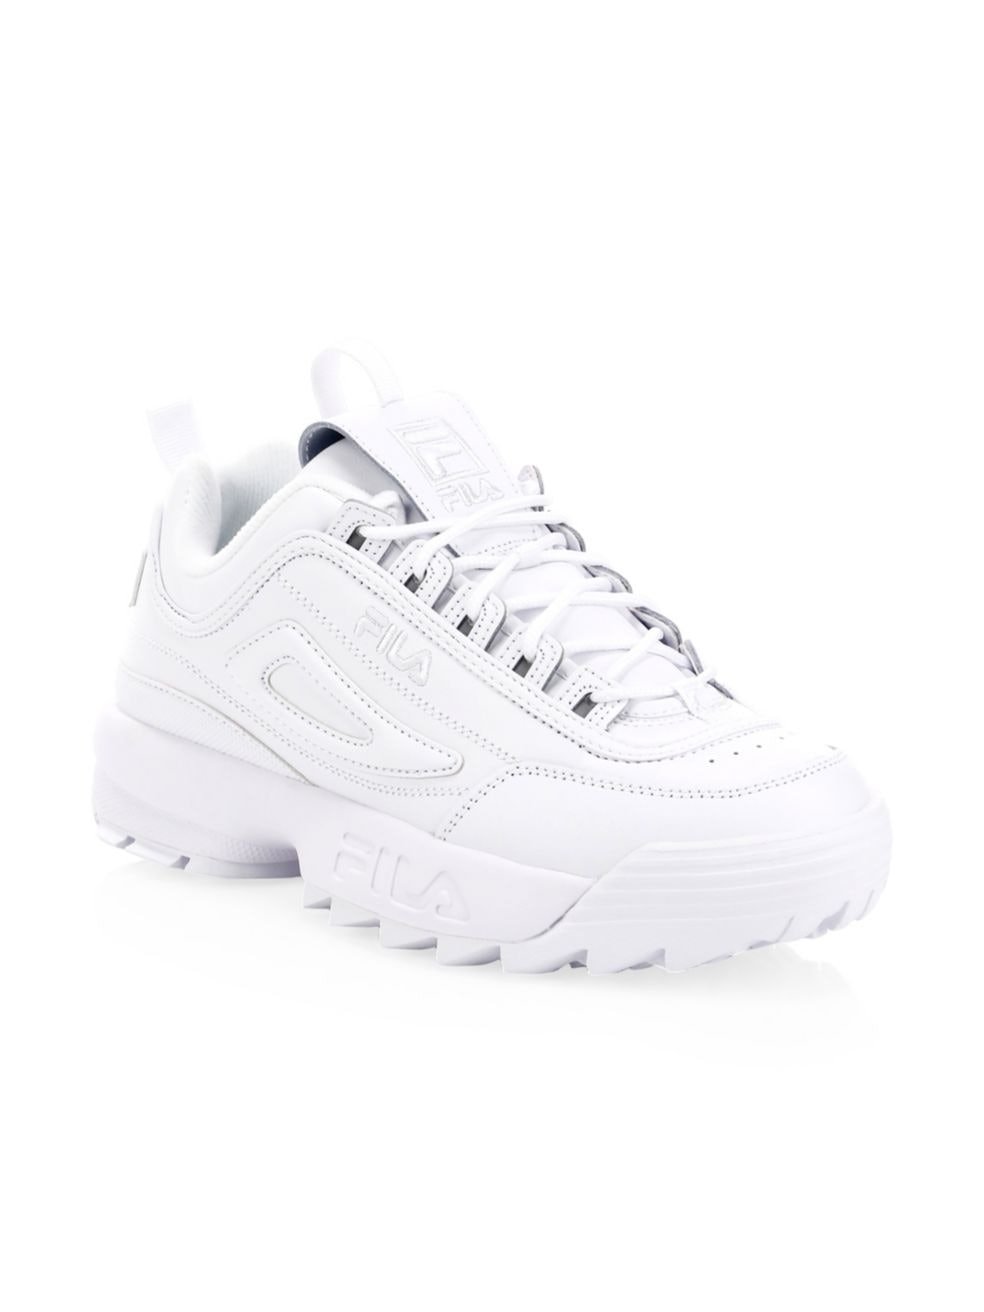 10 White Sneakers For Summer 2019 That 